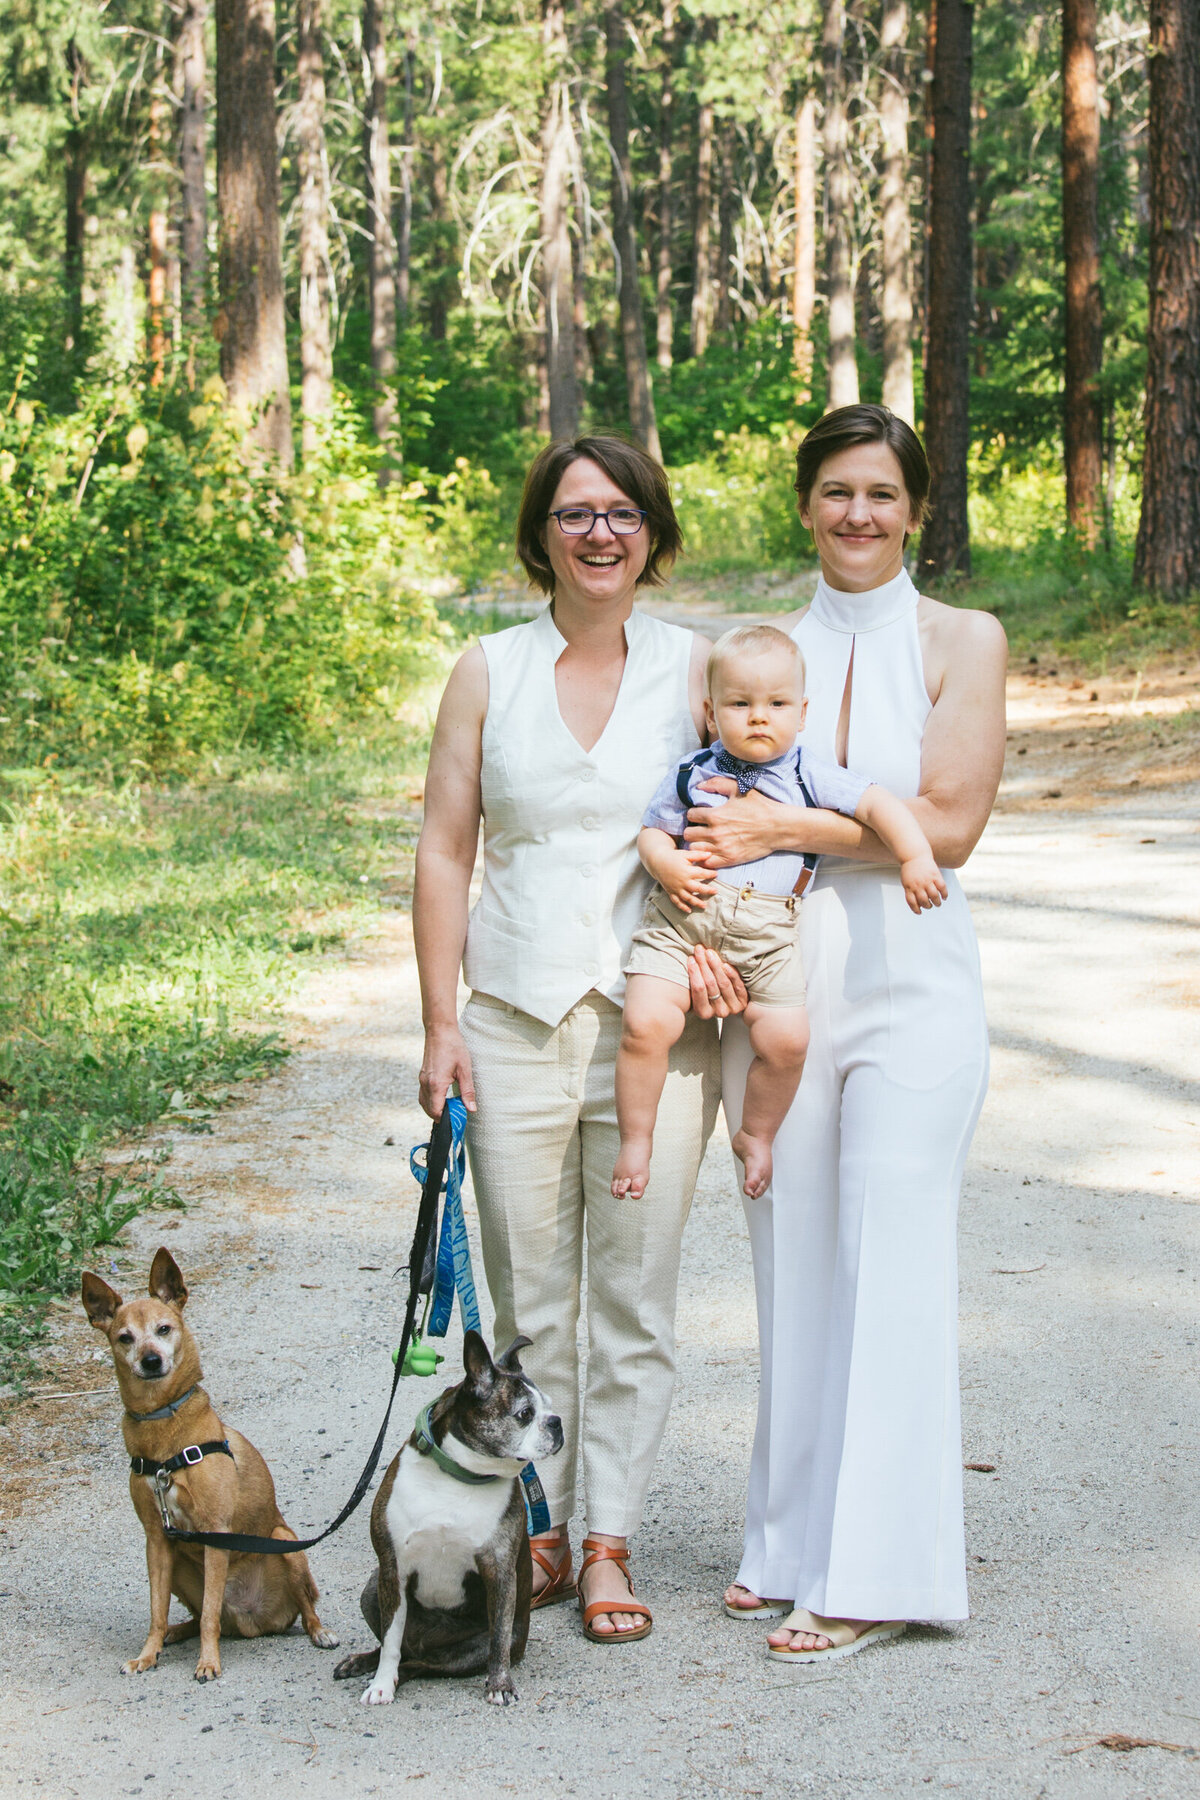 Two brides standing on a trail, holding their son and two dogs for a wedding photo.